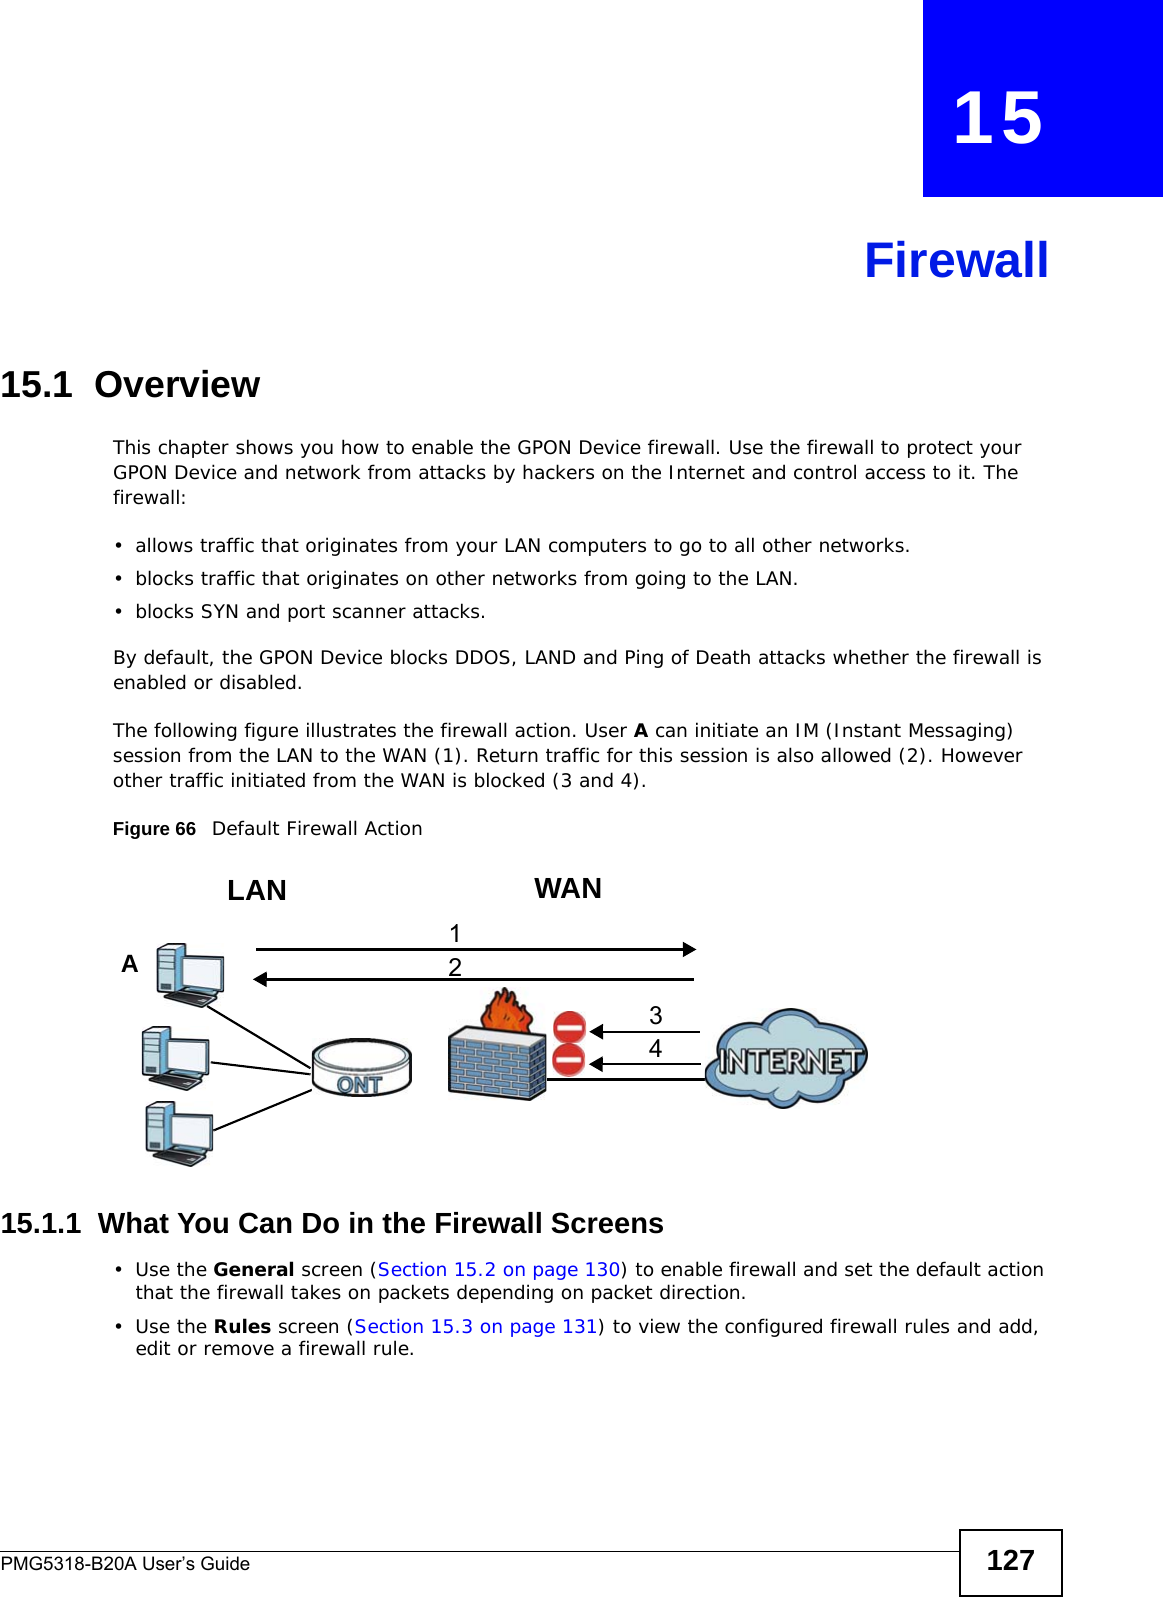 PMG5318-B20A User’s Guide 127CHAPTER   15Firewall15.1  OverviewThis chapter shows you how to enable the GPON Device firewall. Use the firewall to protect your GPON Device and network from attacks by hackers on the Internet and control access to it. The firewall:• allows traffic that originates from your LAN computers to go to all other networks. • blocks traffic that originates on other networks from going to the LAN.• blocks SYN and port scanner attacks.By default, the GPON Device blocks DDOS, LAND and Ping of Death attacks whether the firewall is enabled or disabled.The following figure illustrates the firewall action. User A can initiate an IM (Instant Messaging) session from the LAN to the WAN (1). Return traffic for this session is also allowed (2). However other traffic initiated from the WAN is blocked (3 and 4).Figure 66   Default Firewall Action15.1.1  What You Can Do in the Firewall Screens•Use the General screen (Section 15.2 on page 130) to enable firewall and set the default action that the firewall takes on packets depending on packet direction.•Use the Rules screen (Section 15.3 on page 131) to view the configured firewall rules and add, edit or remove a firewall rule.WANLAN3412A